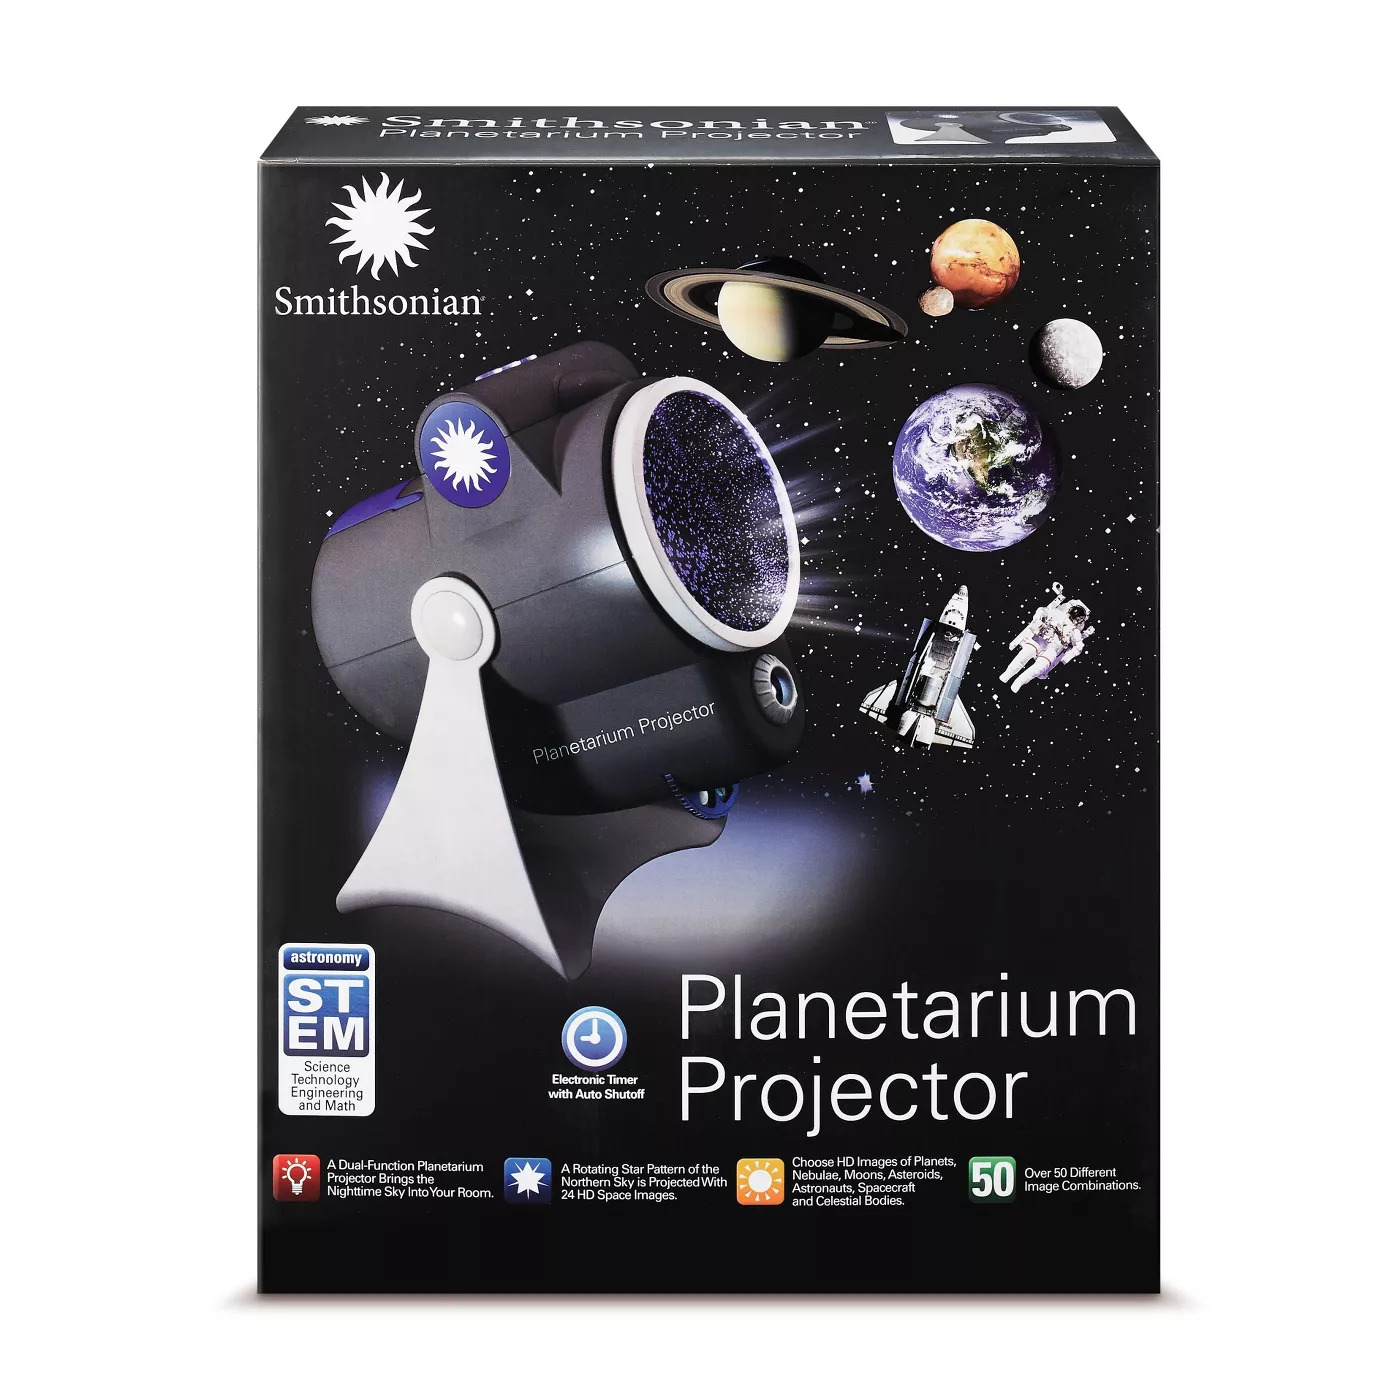 Smithsonian Dual-Function Planetarium Projector w 24 HD Space Images & More B293